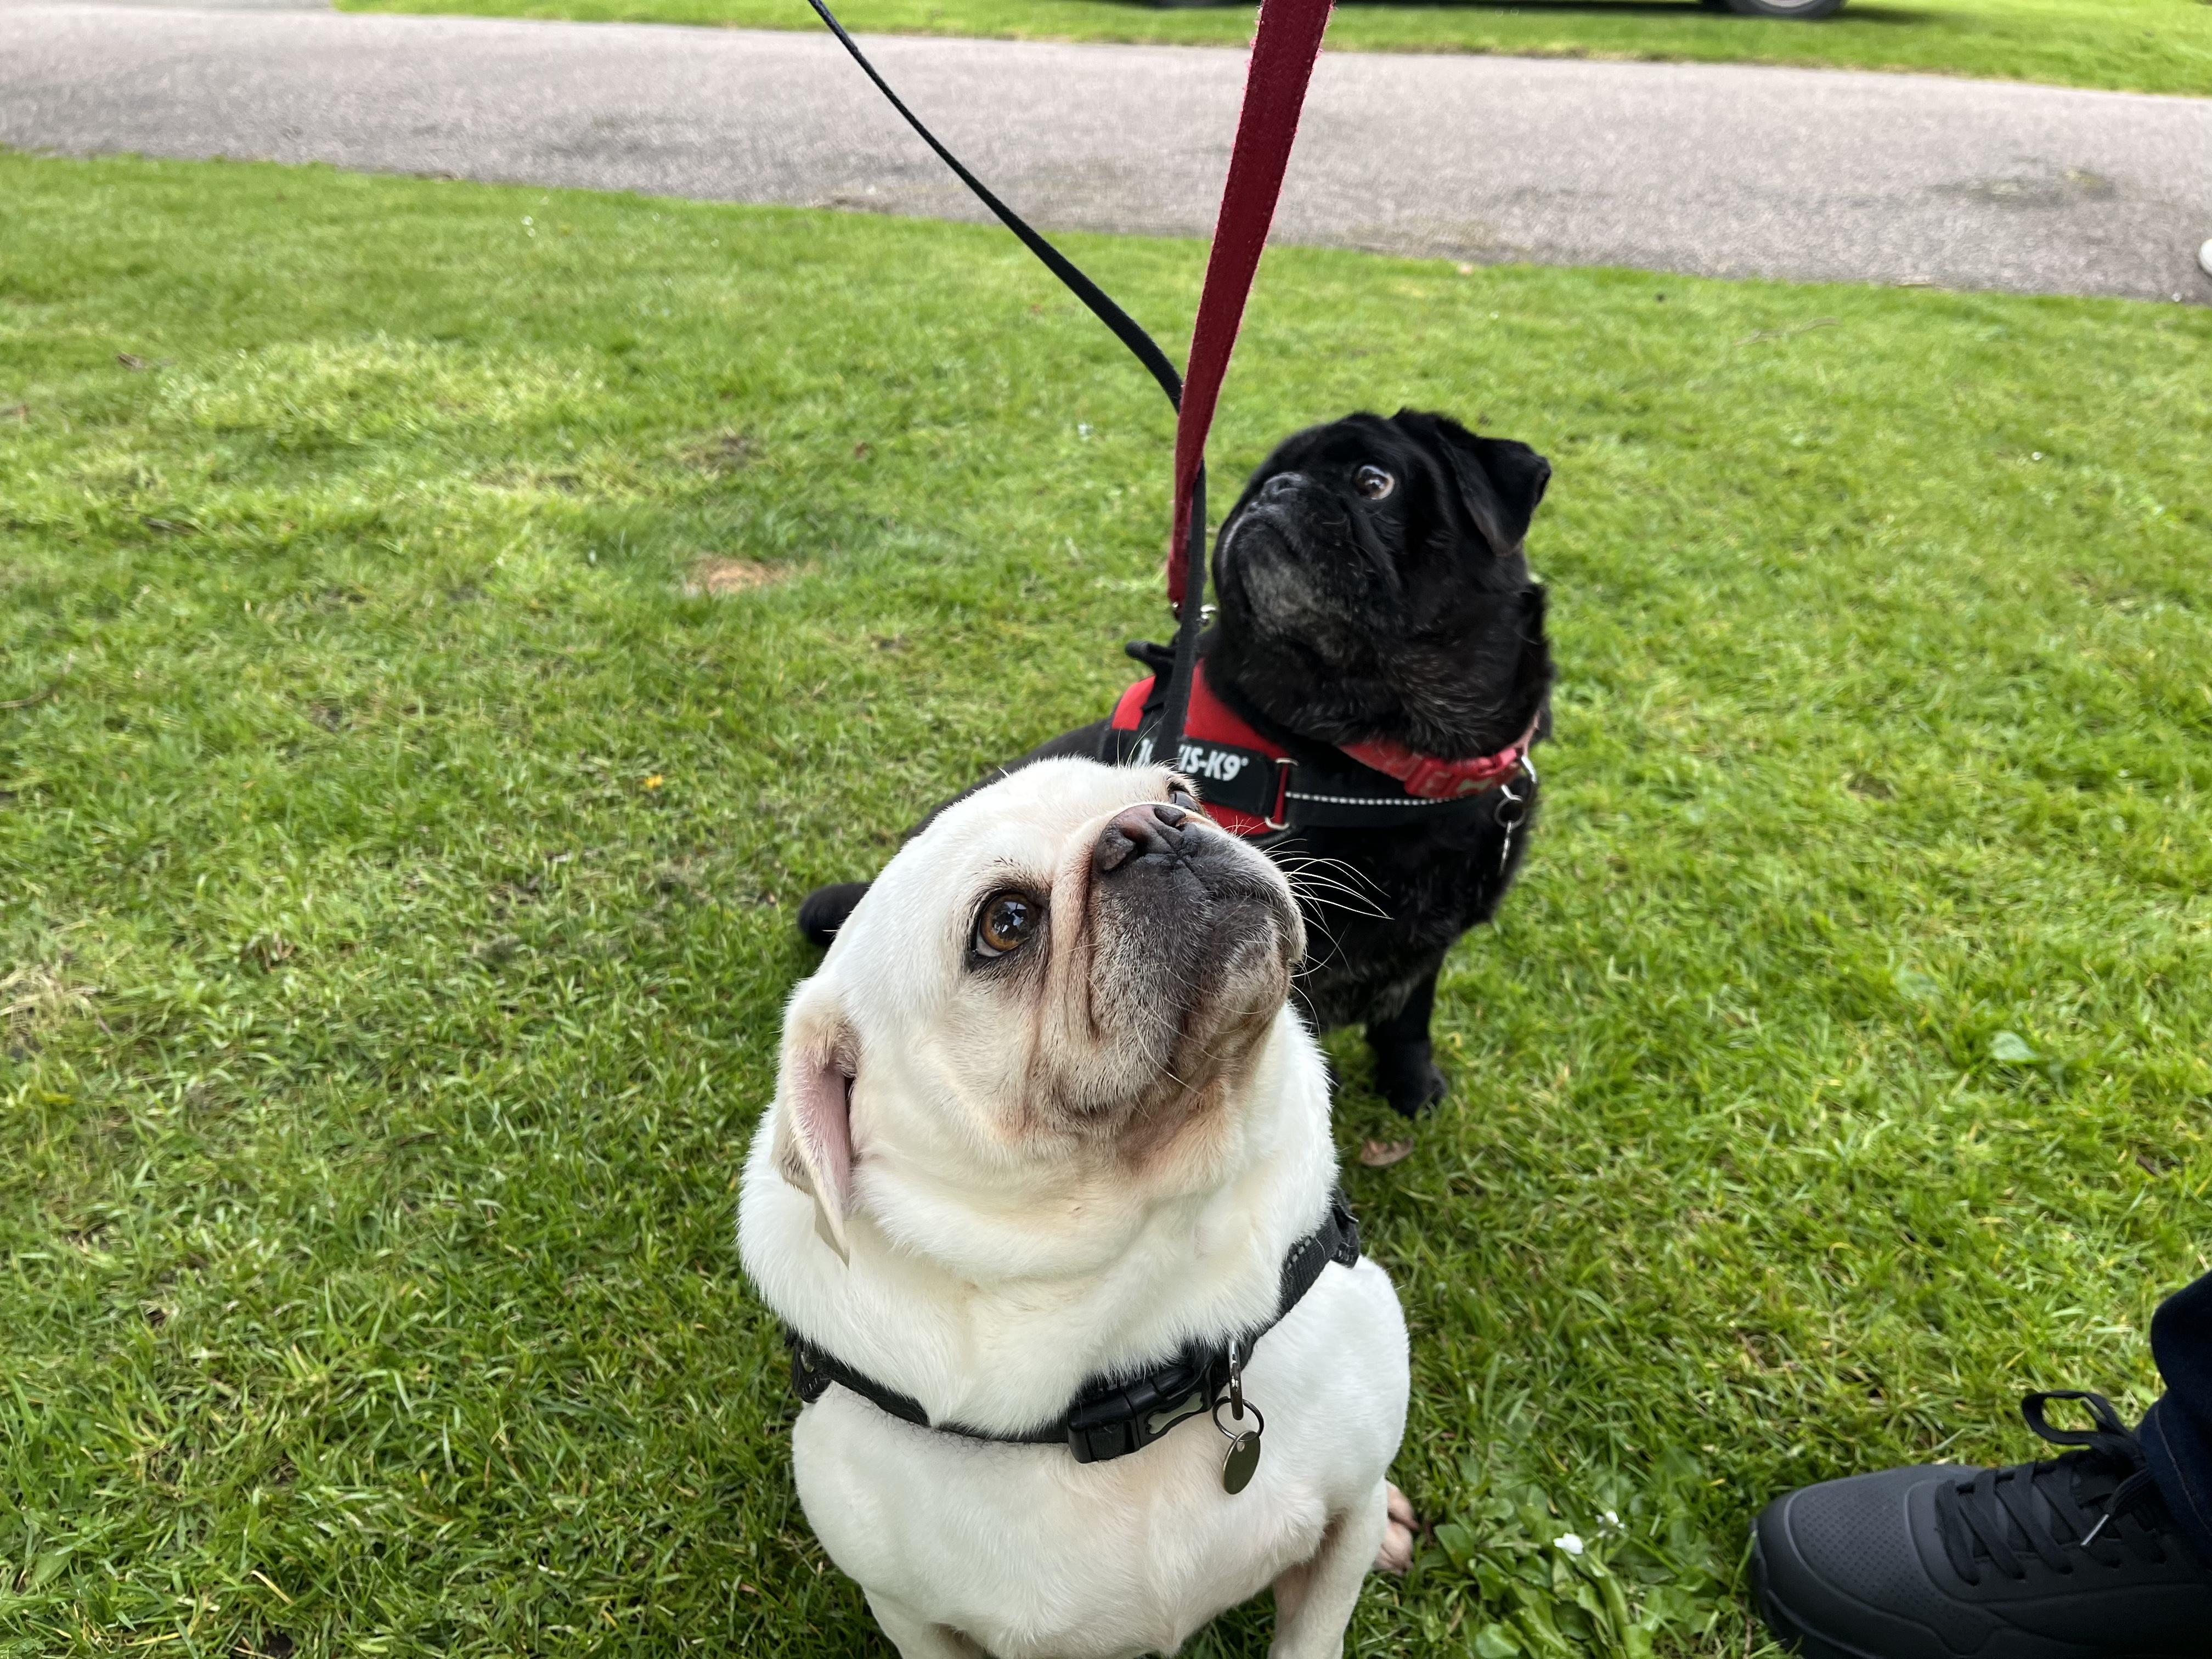 Two pugs, one black and one white, at Dog Day in Halstead.